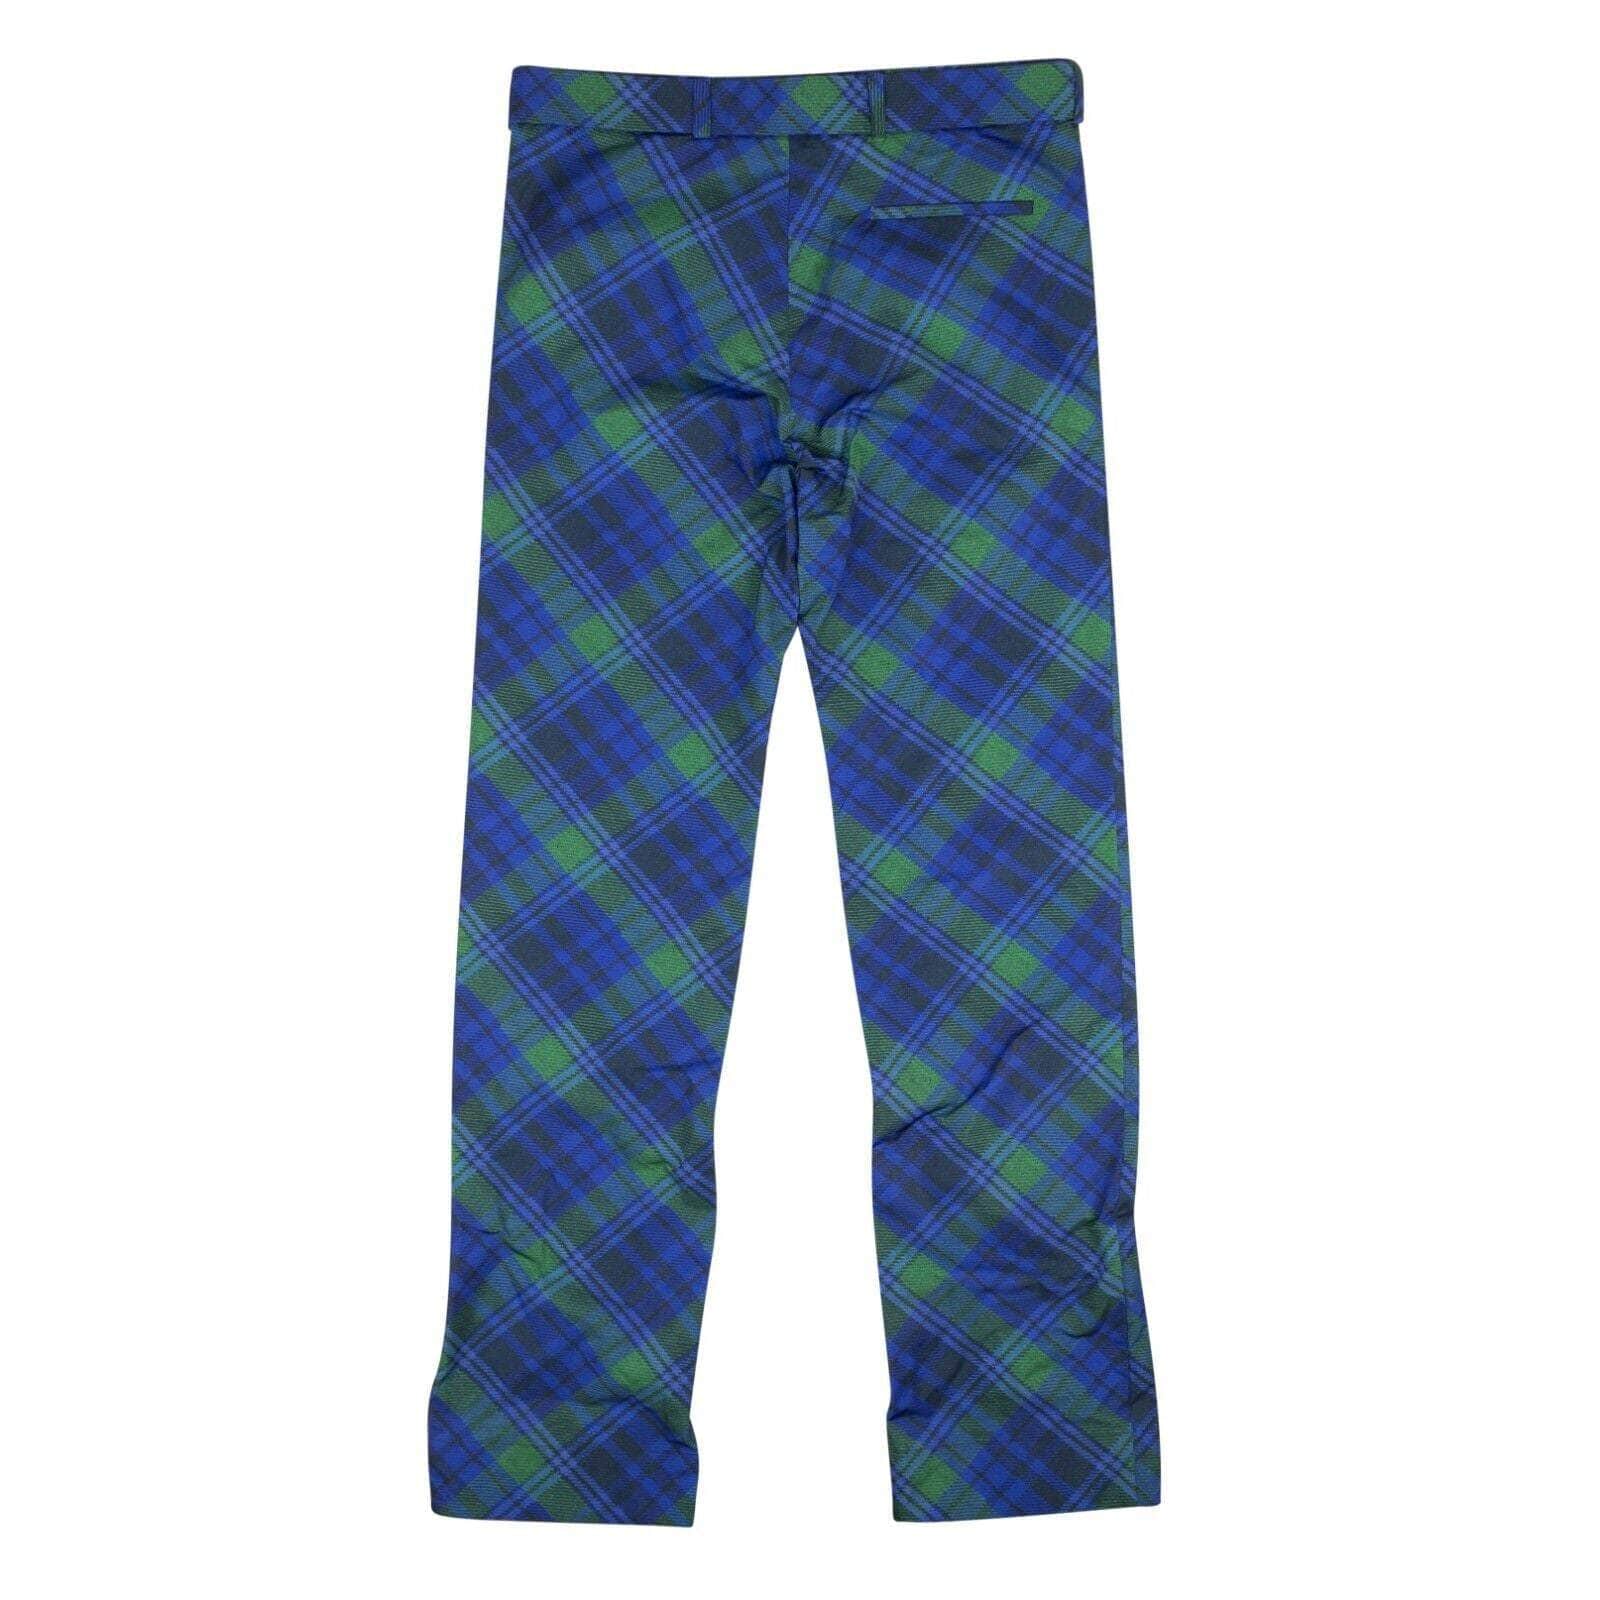 Stefan Cooke 500-750, channelenable-all, chicmi, couponcollection, gender-mens, main-clothing, mens-casual-pants, mens-shoes, MixedApparel, size-l, size-m, size-s, stefan-cooke Blue And Green Studded Tartan Print Trousers